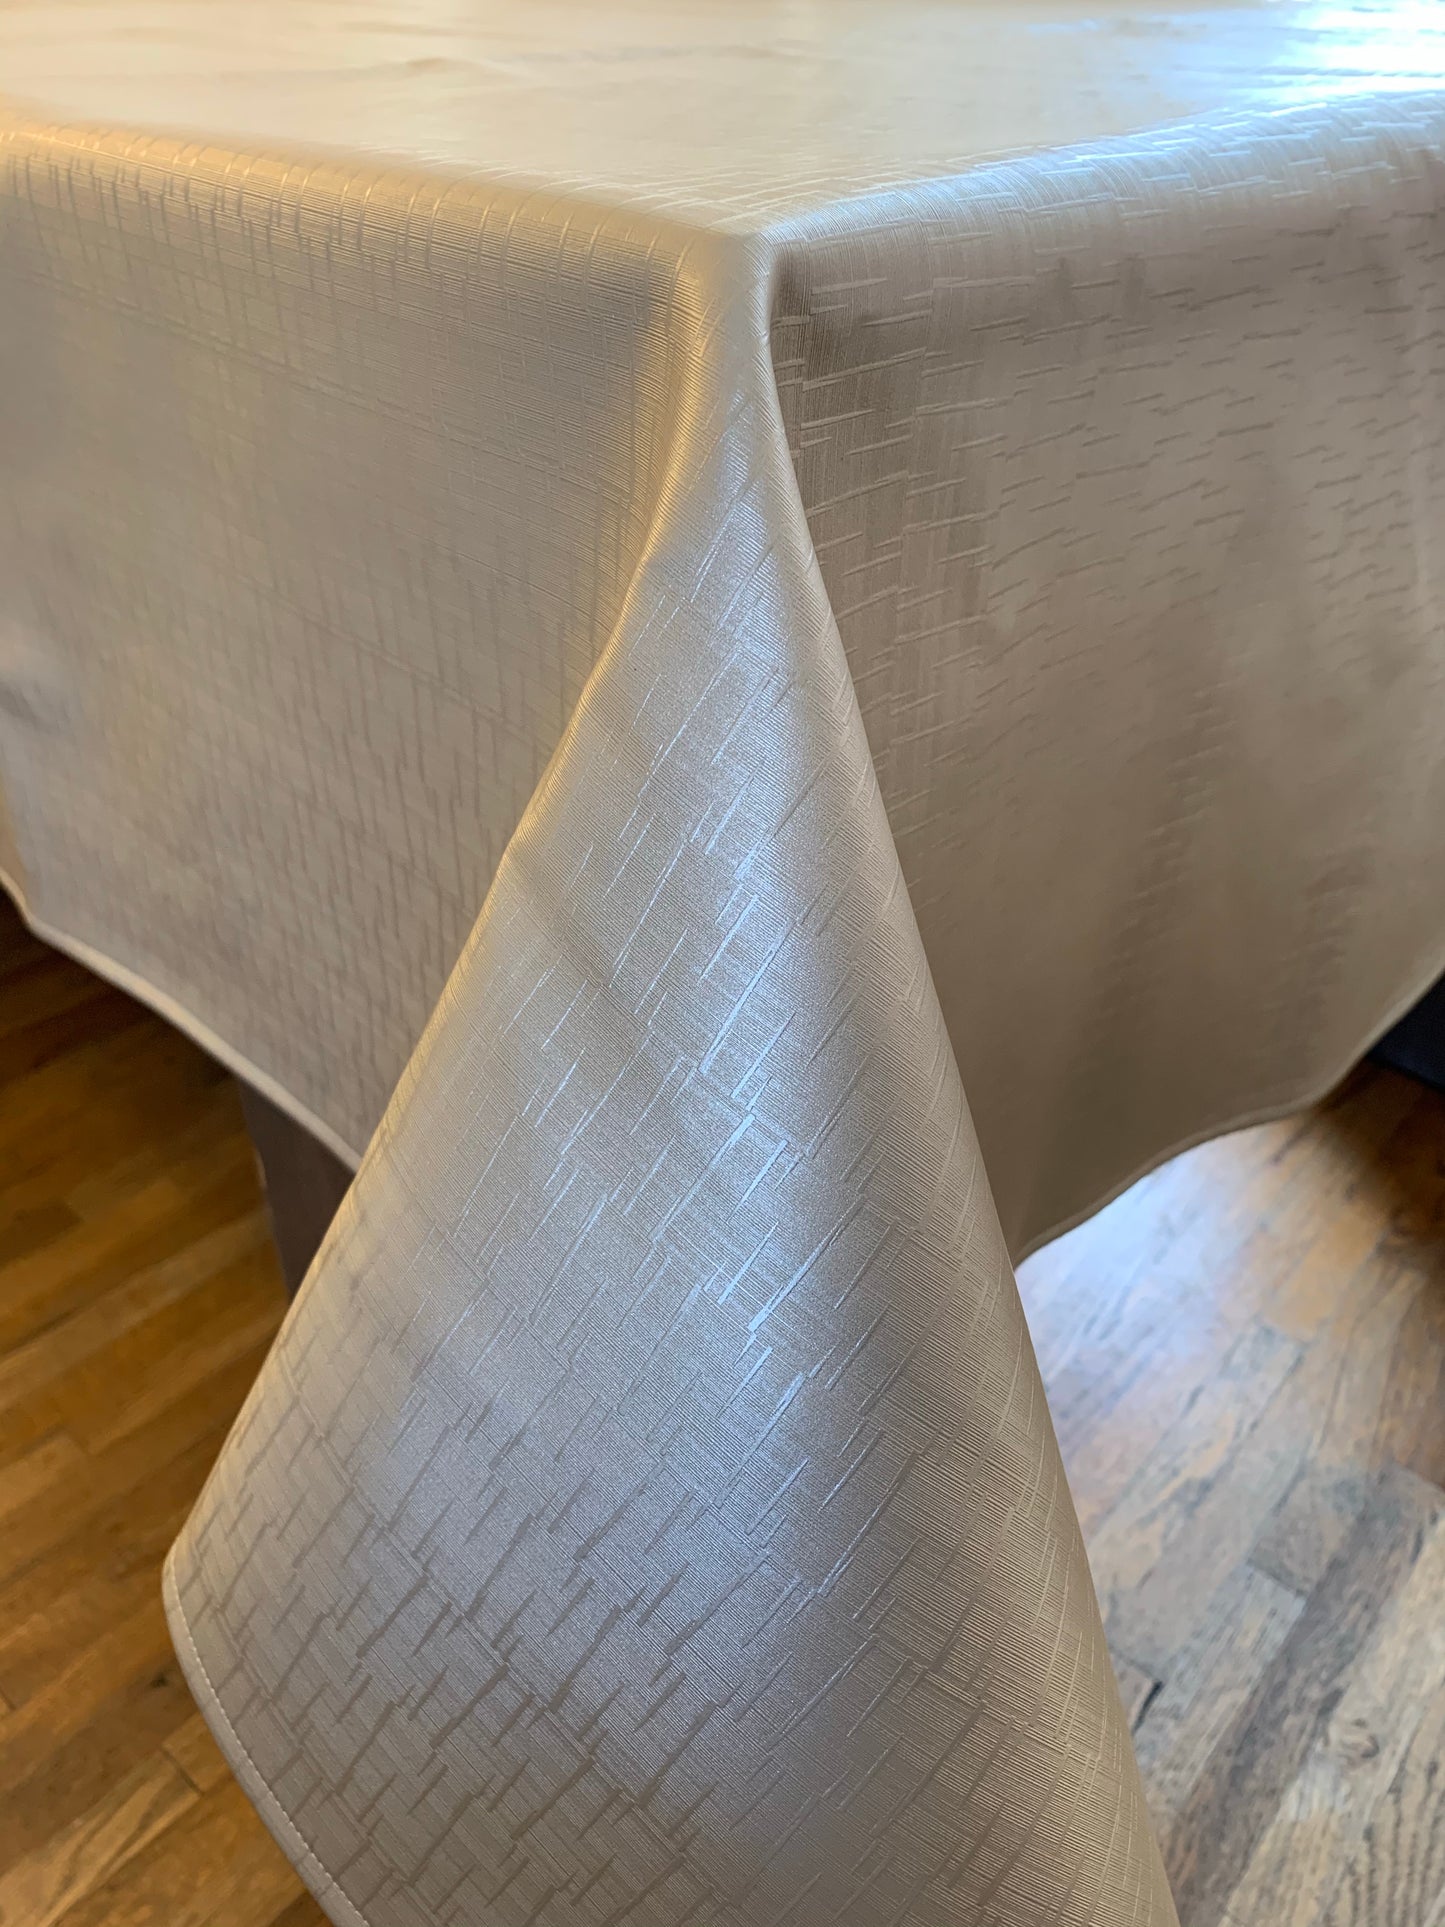 Silver Waterproof stain resistant stain proof magic tablecloth. Pu leather/pvc faux leather.